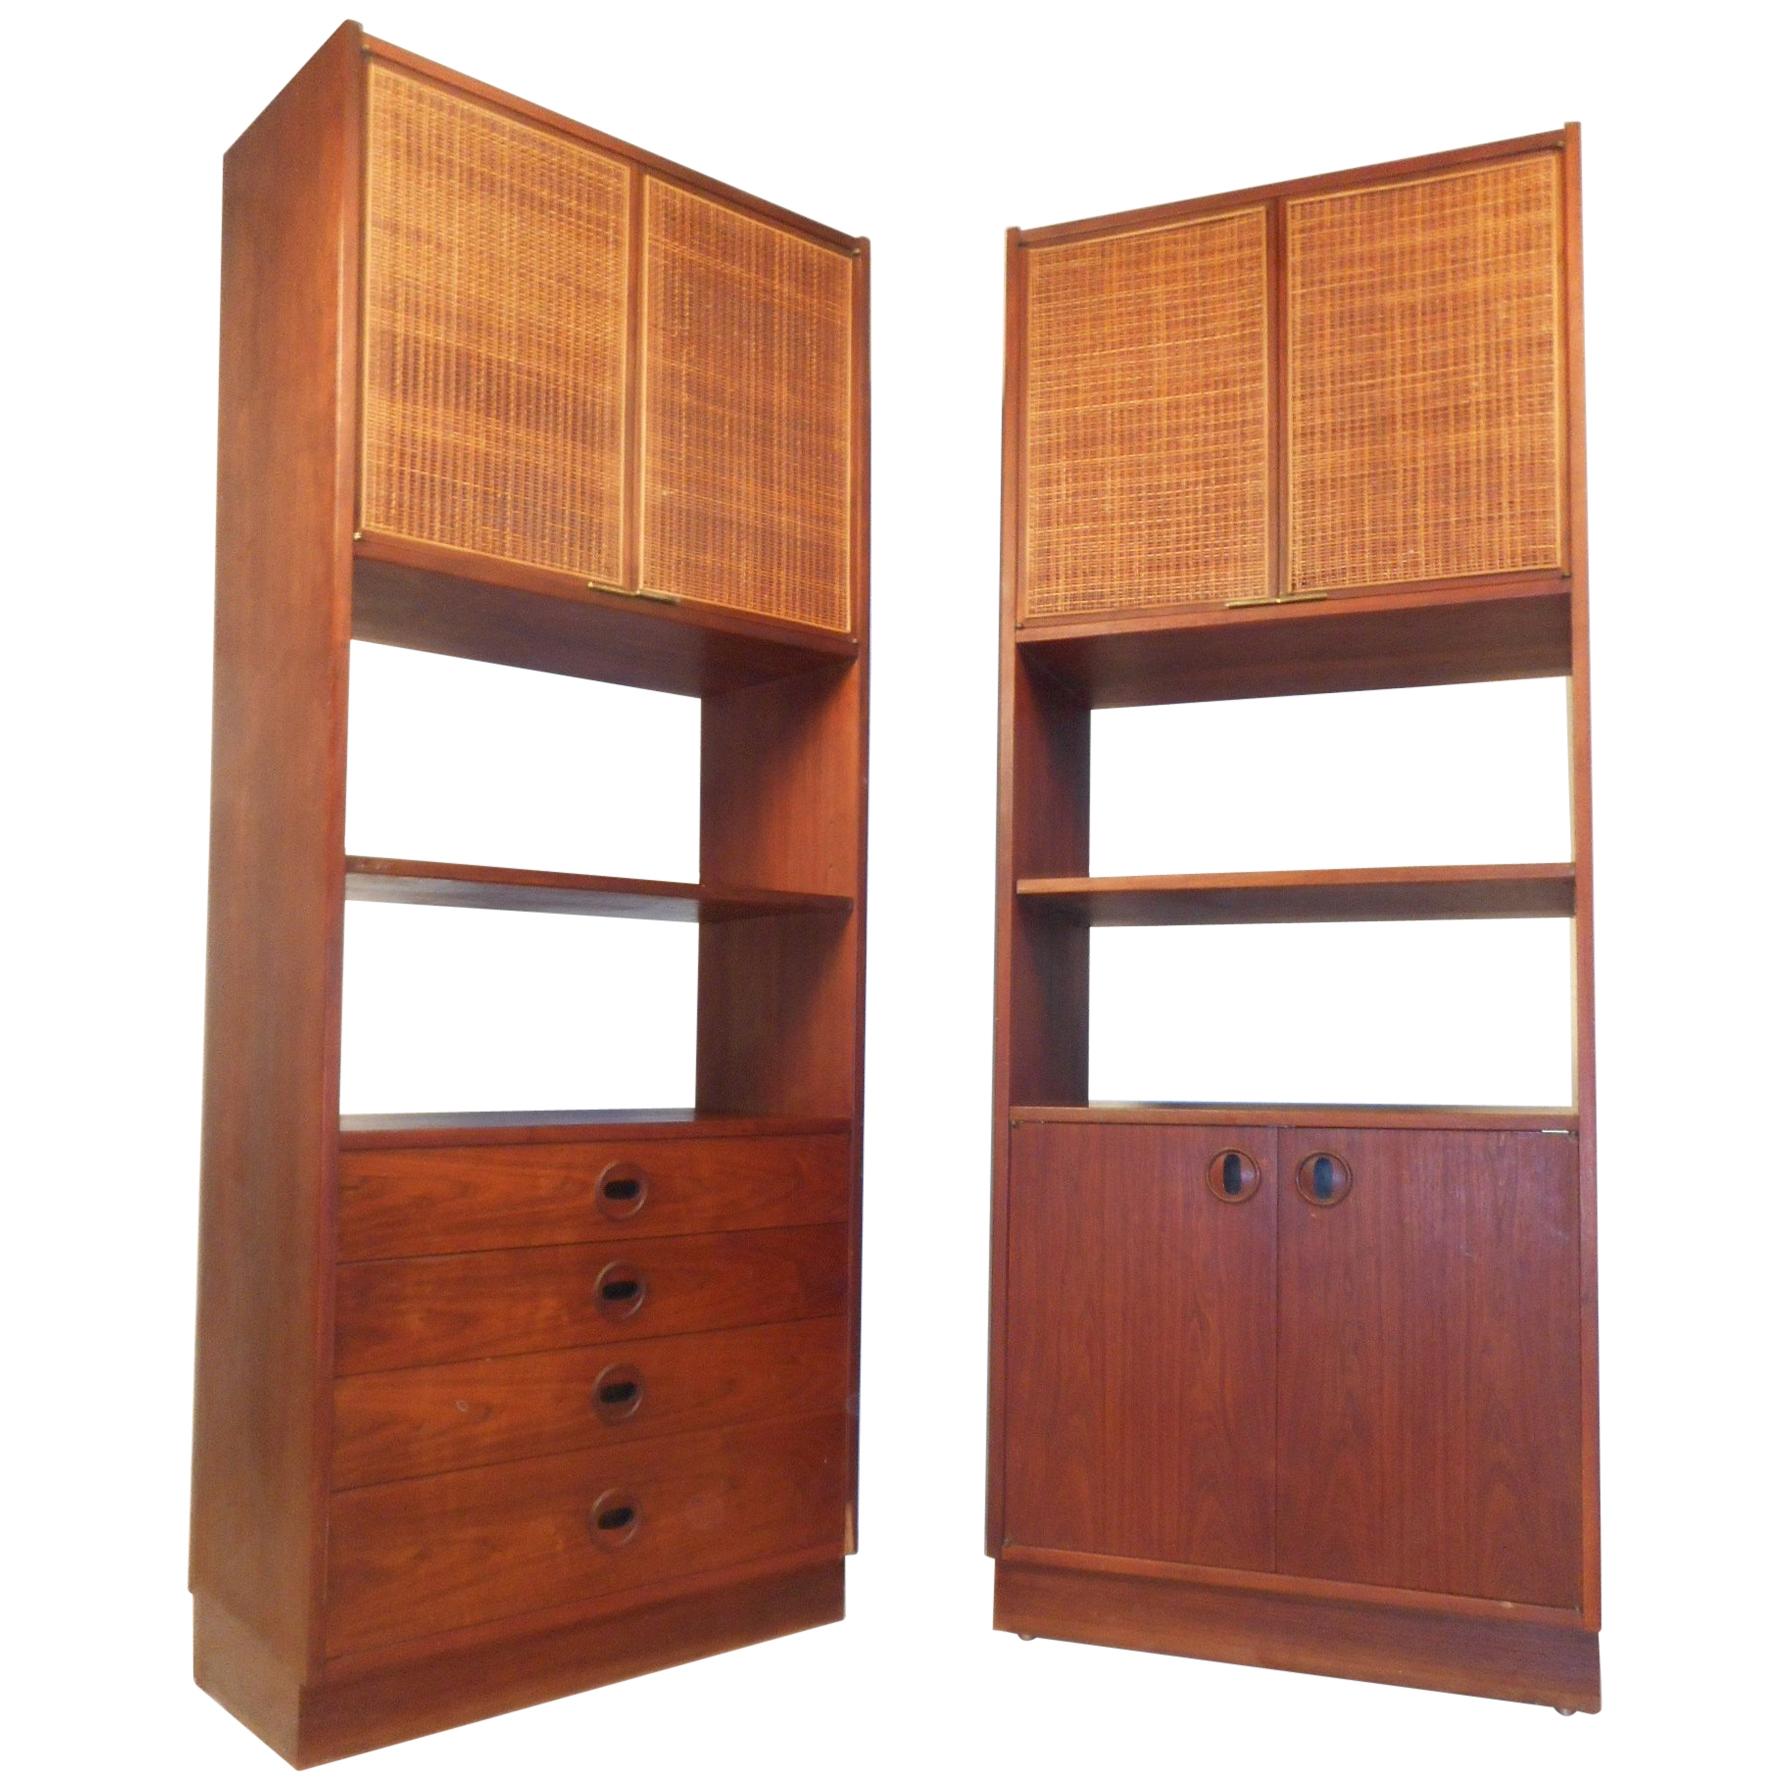 Pair of Mid-Century Modern Bookcases or Shelves